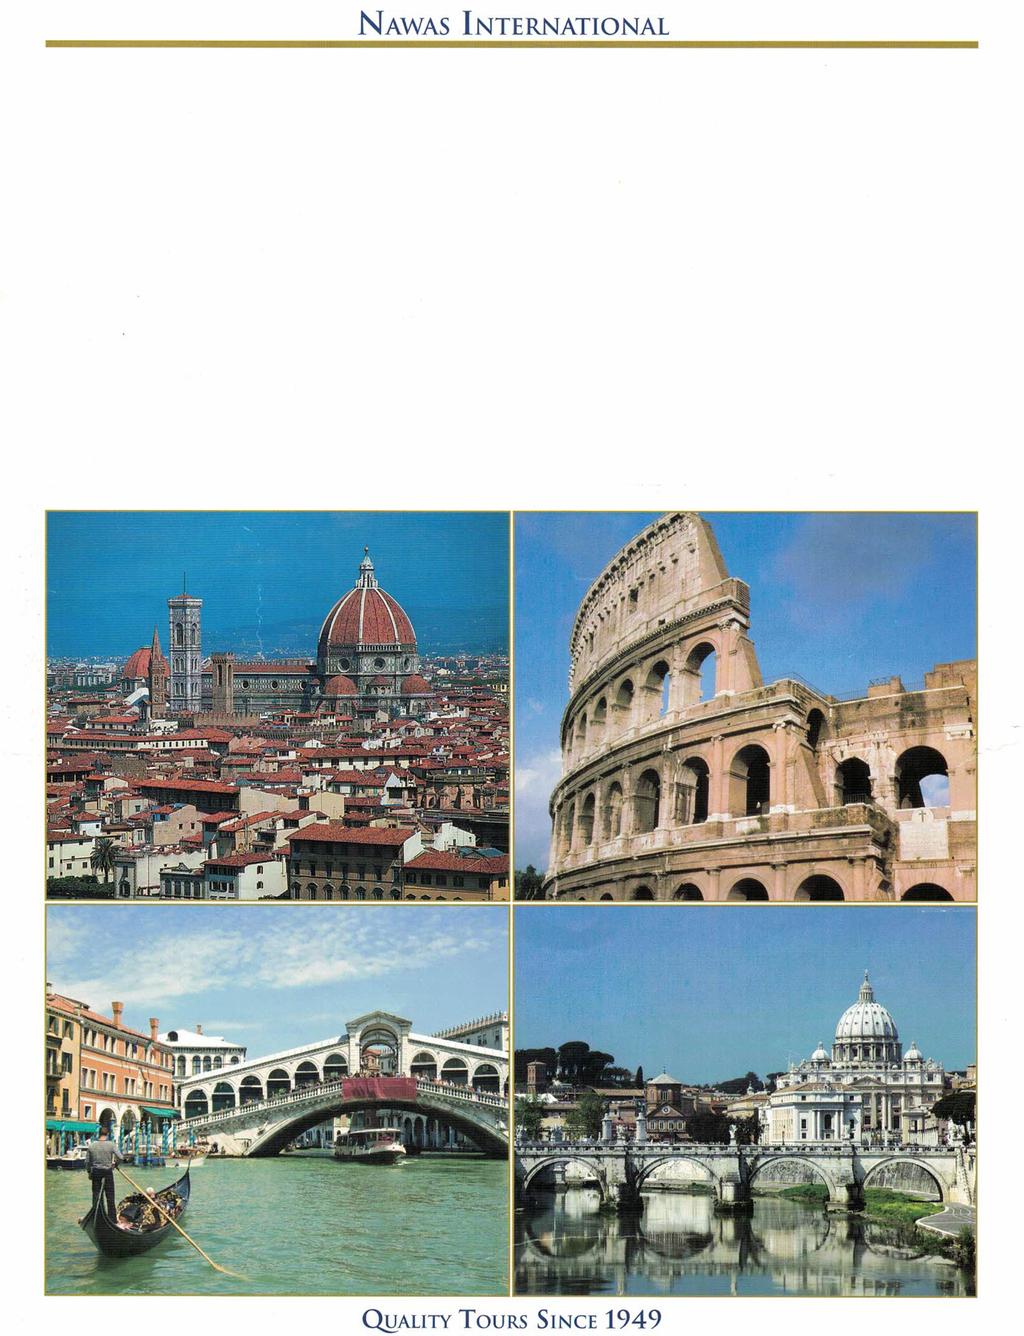 THE BEST OF ITALY 11 Days: November 8-18, 2017 visiting Venice Pisa Florence Sorrento Pompeii Rome hosted by Rev.